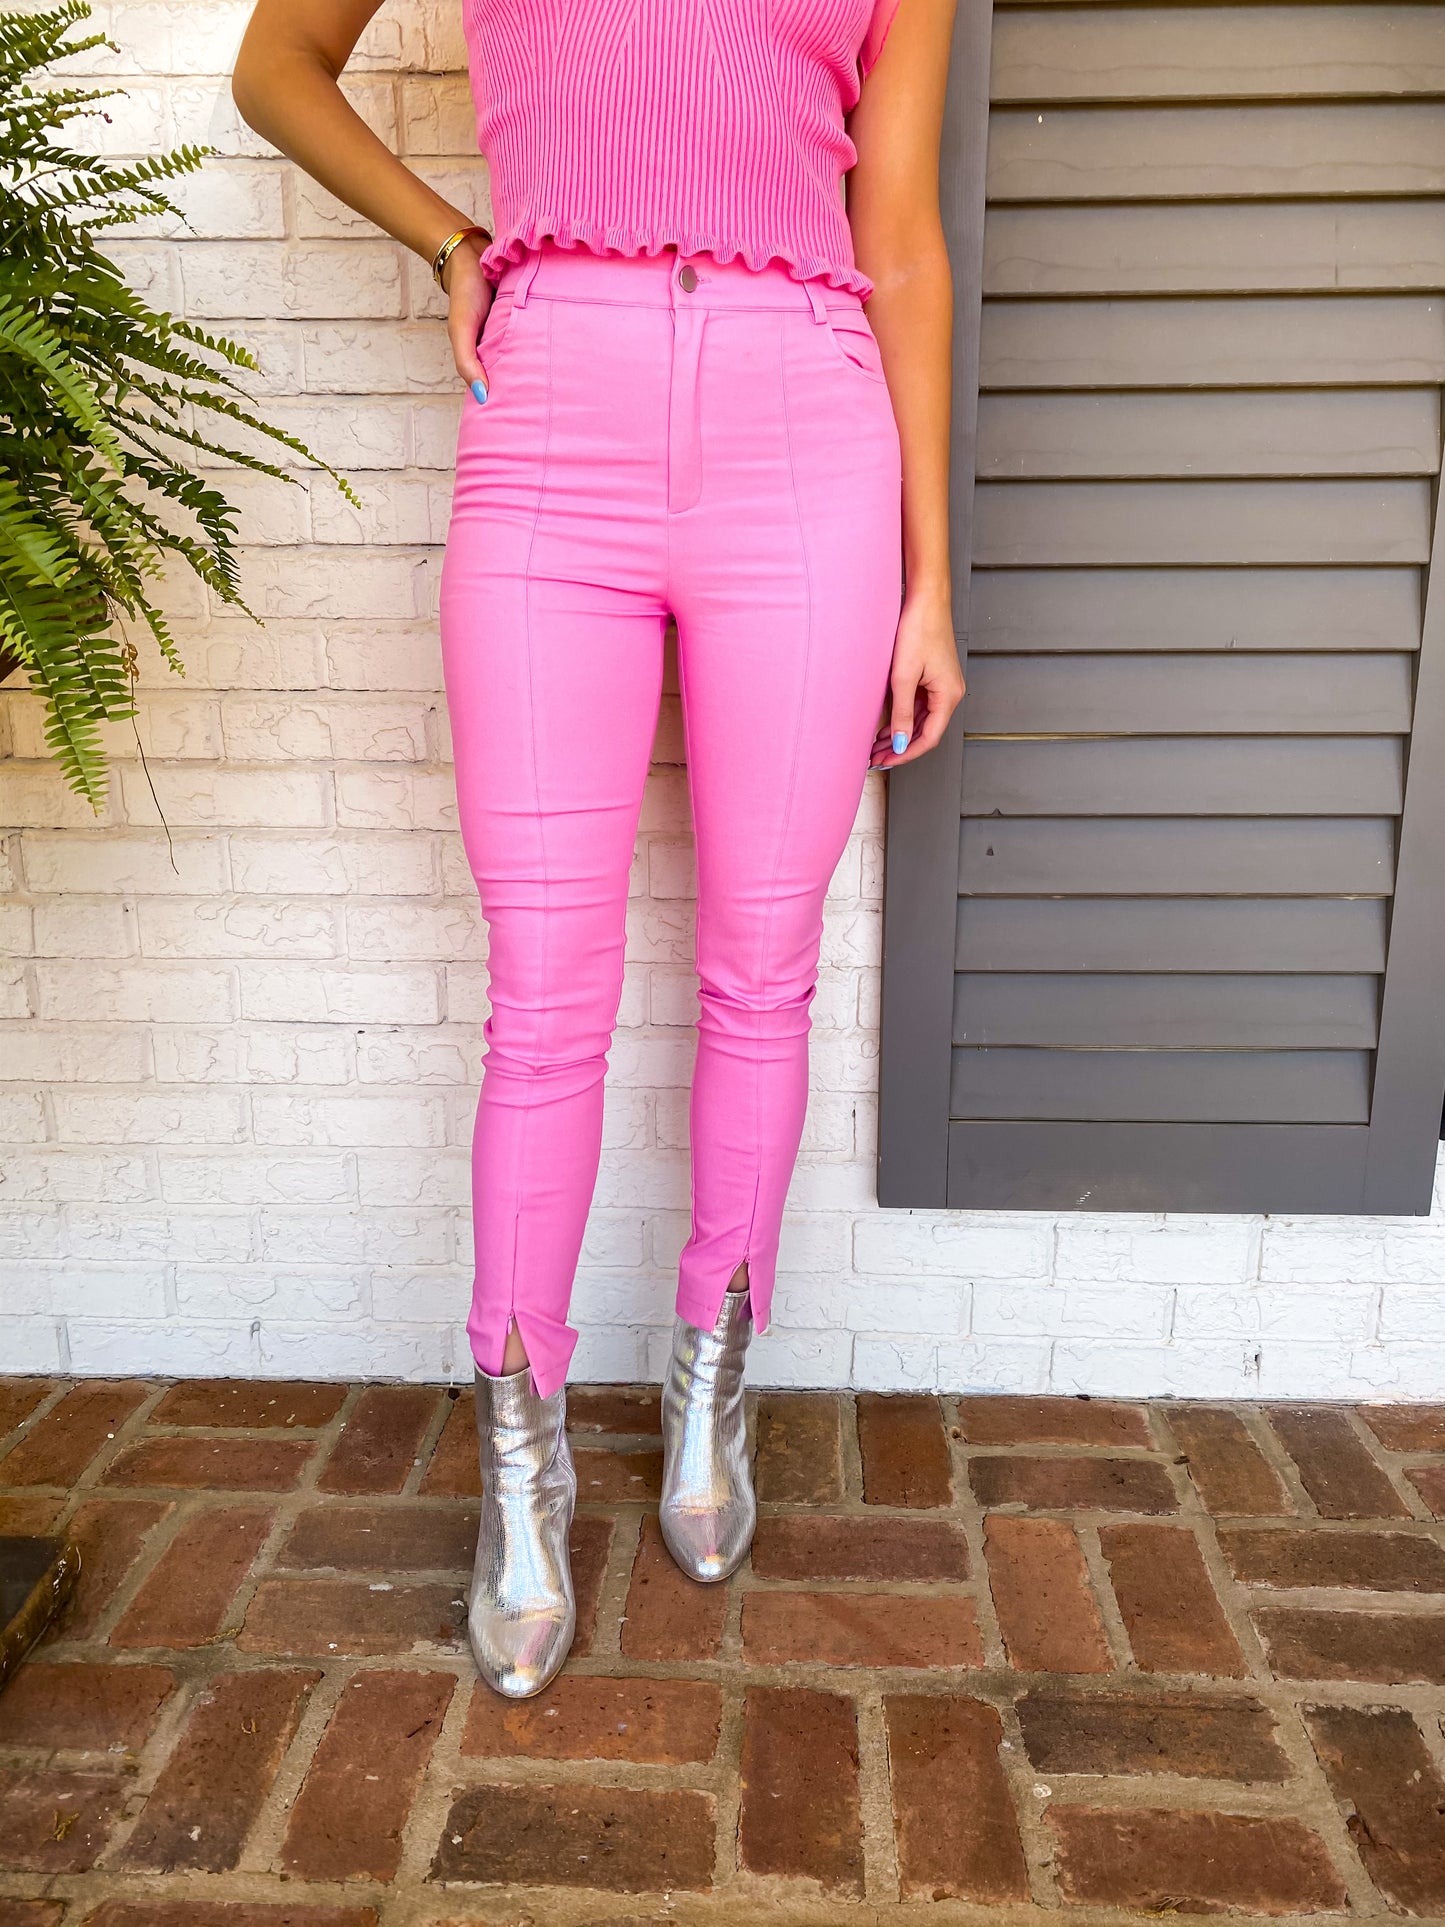 Come On Barbie Pink Pants